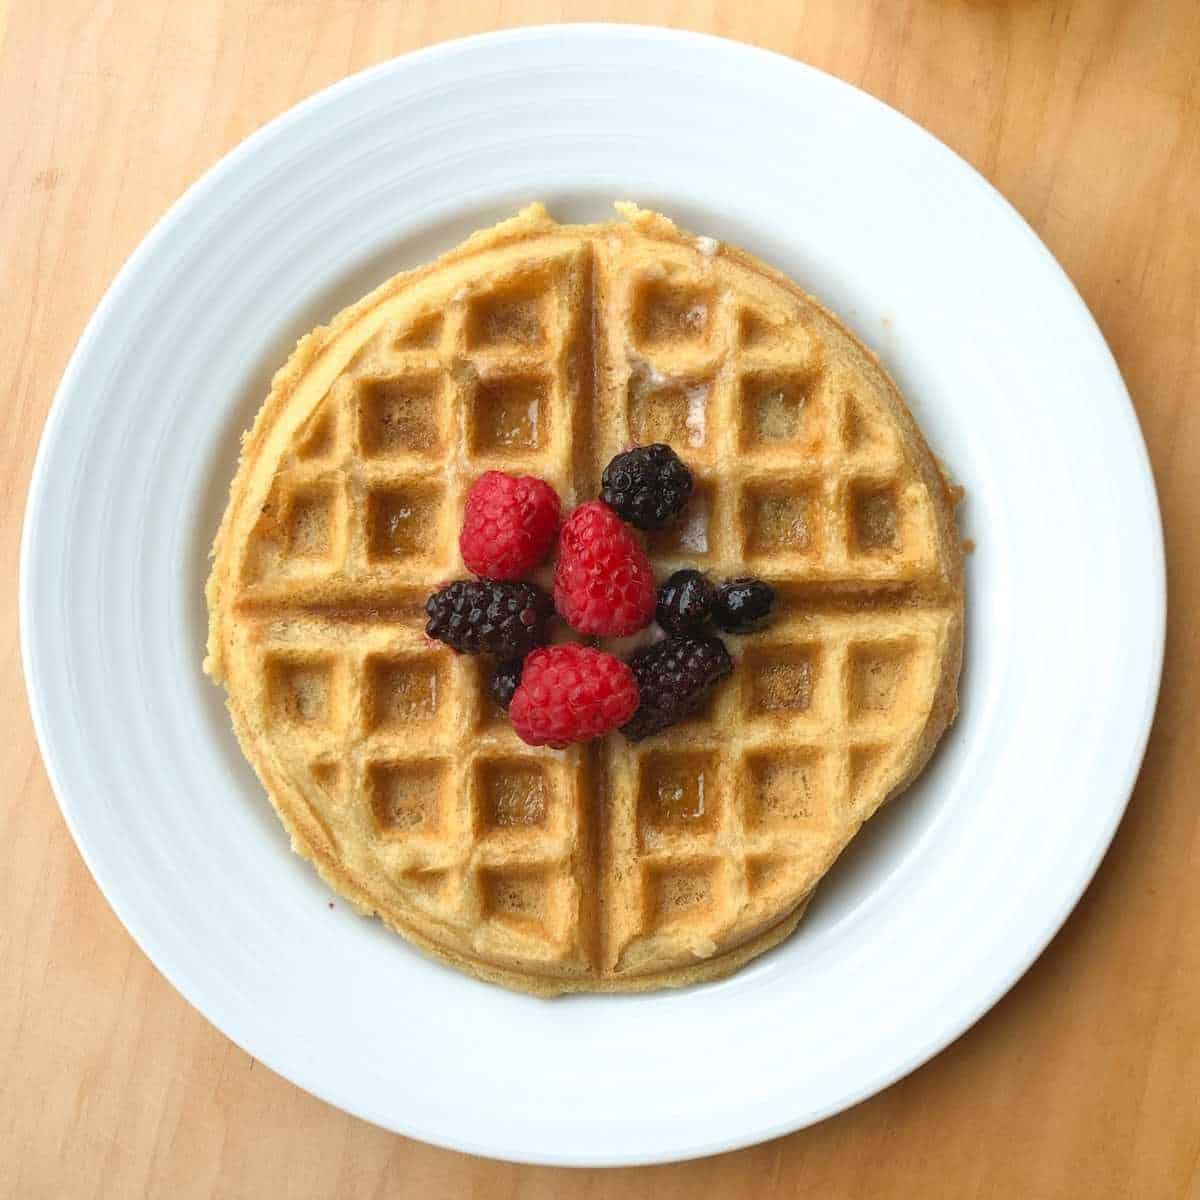 A waffle topped with berries